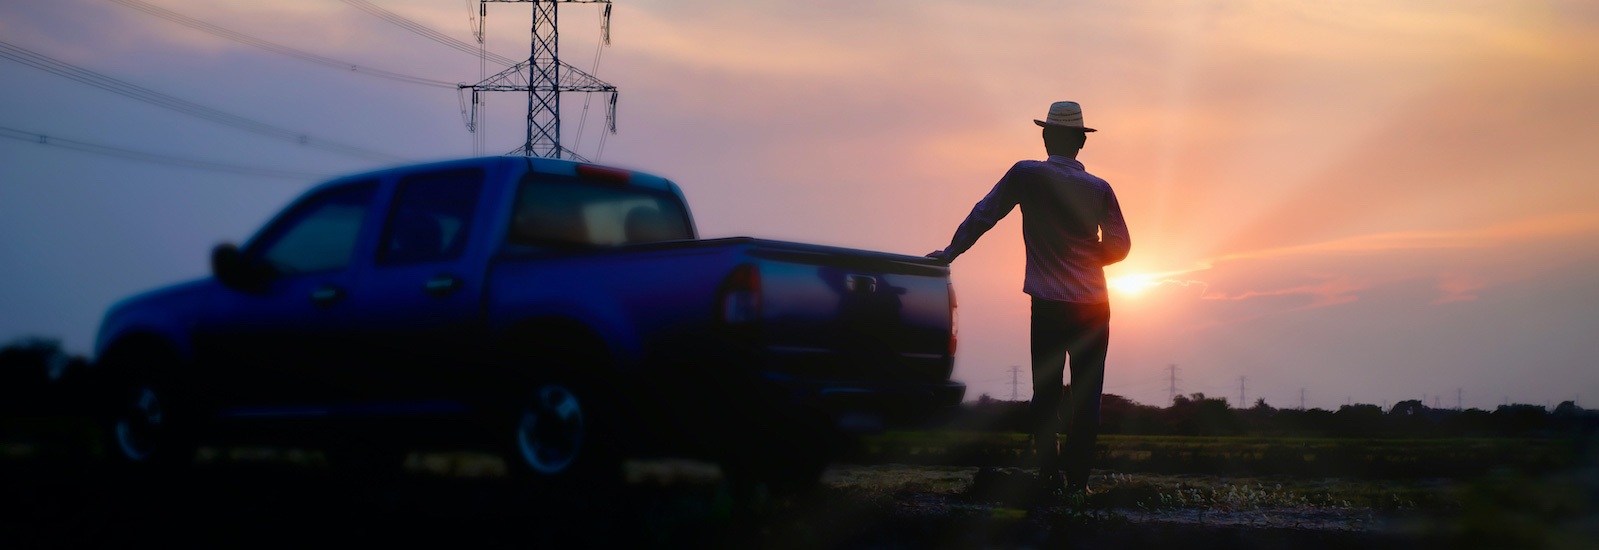 man standing at back of pickup watching sunset with powerlines in background